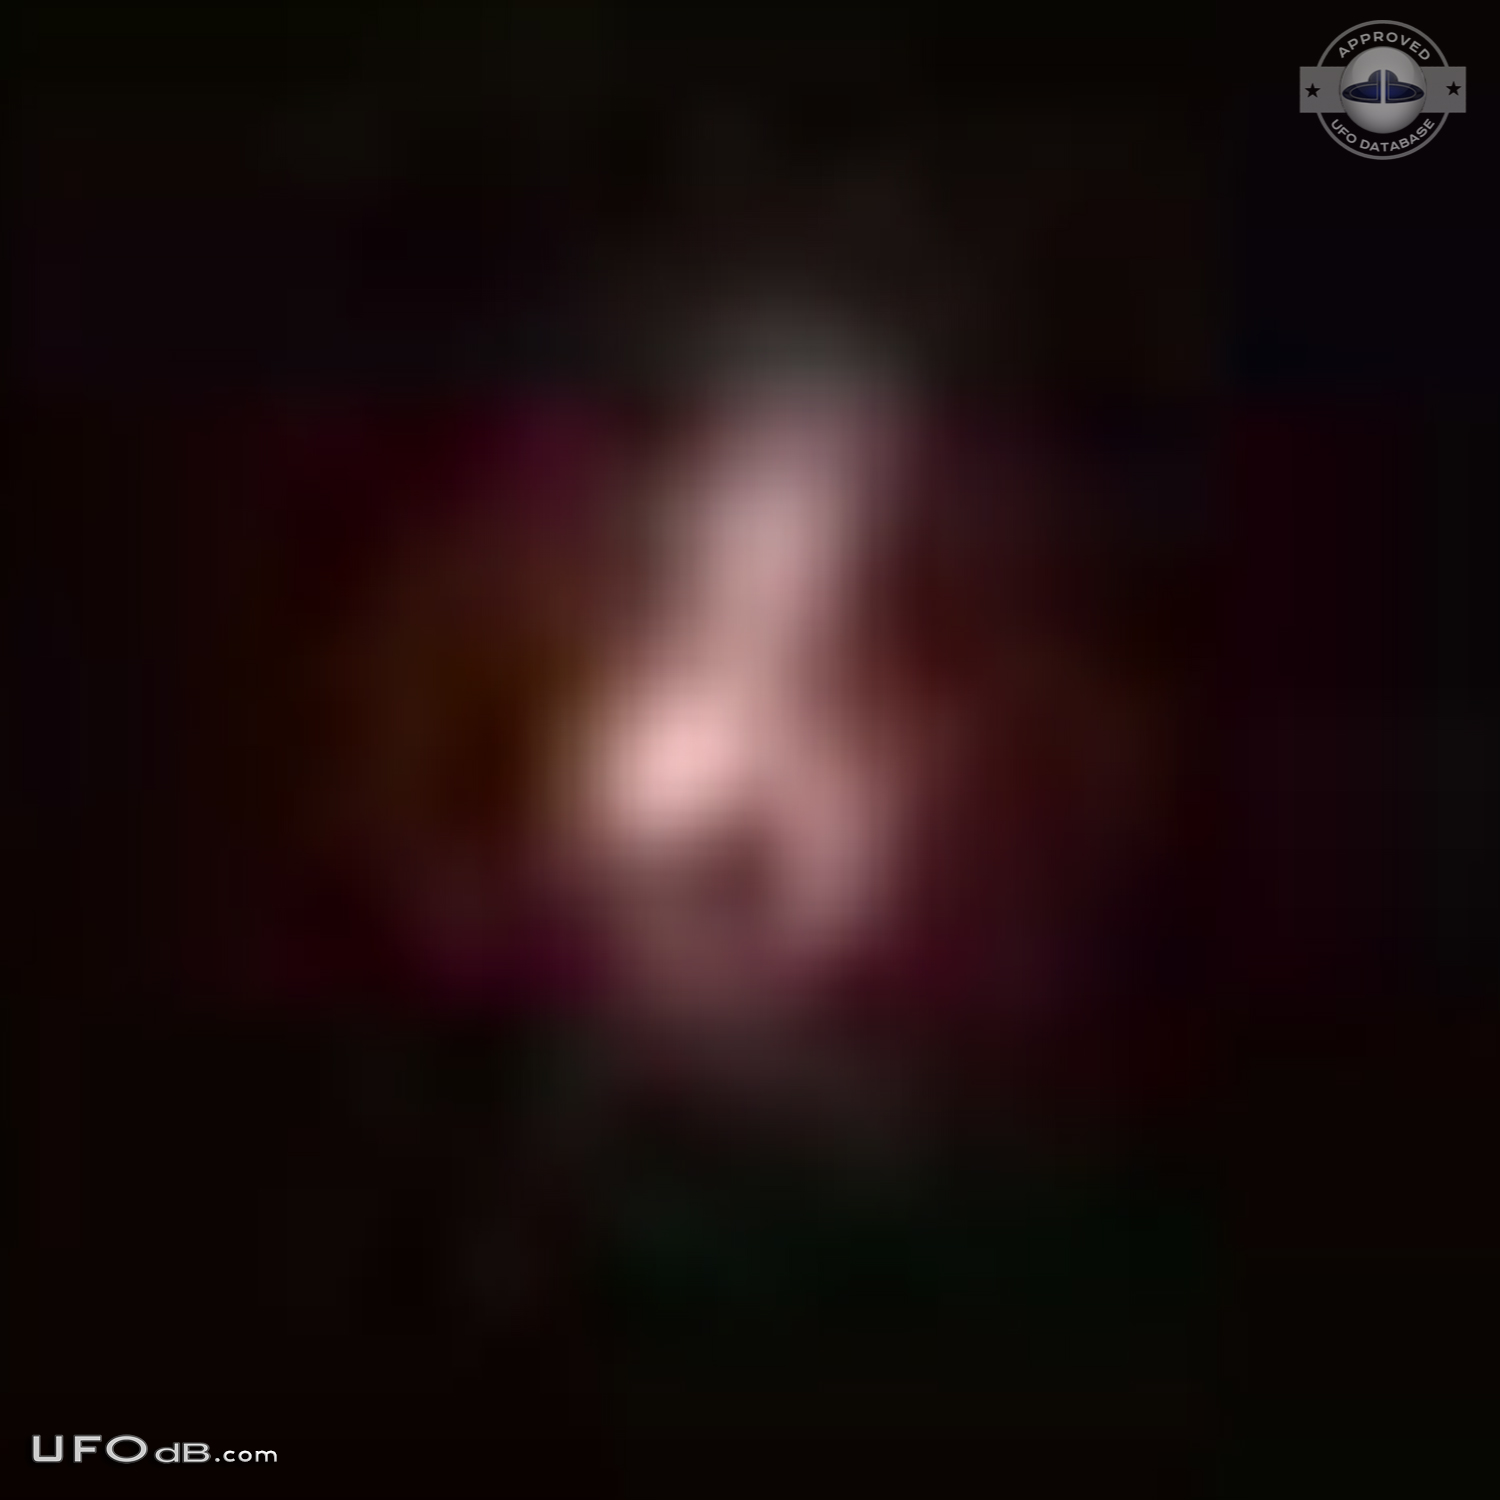 Huge red ball UFO seen by a group of people in West Allis, Wisconsin UFO Picture #375-5